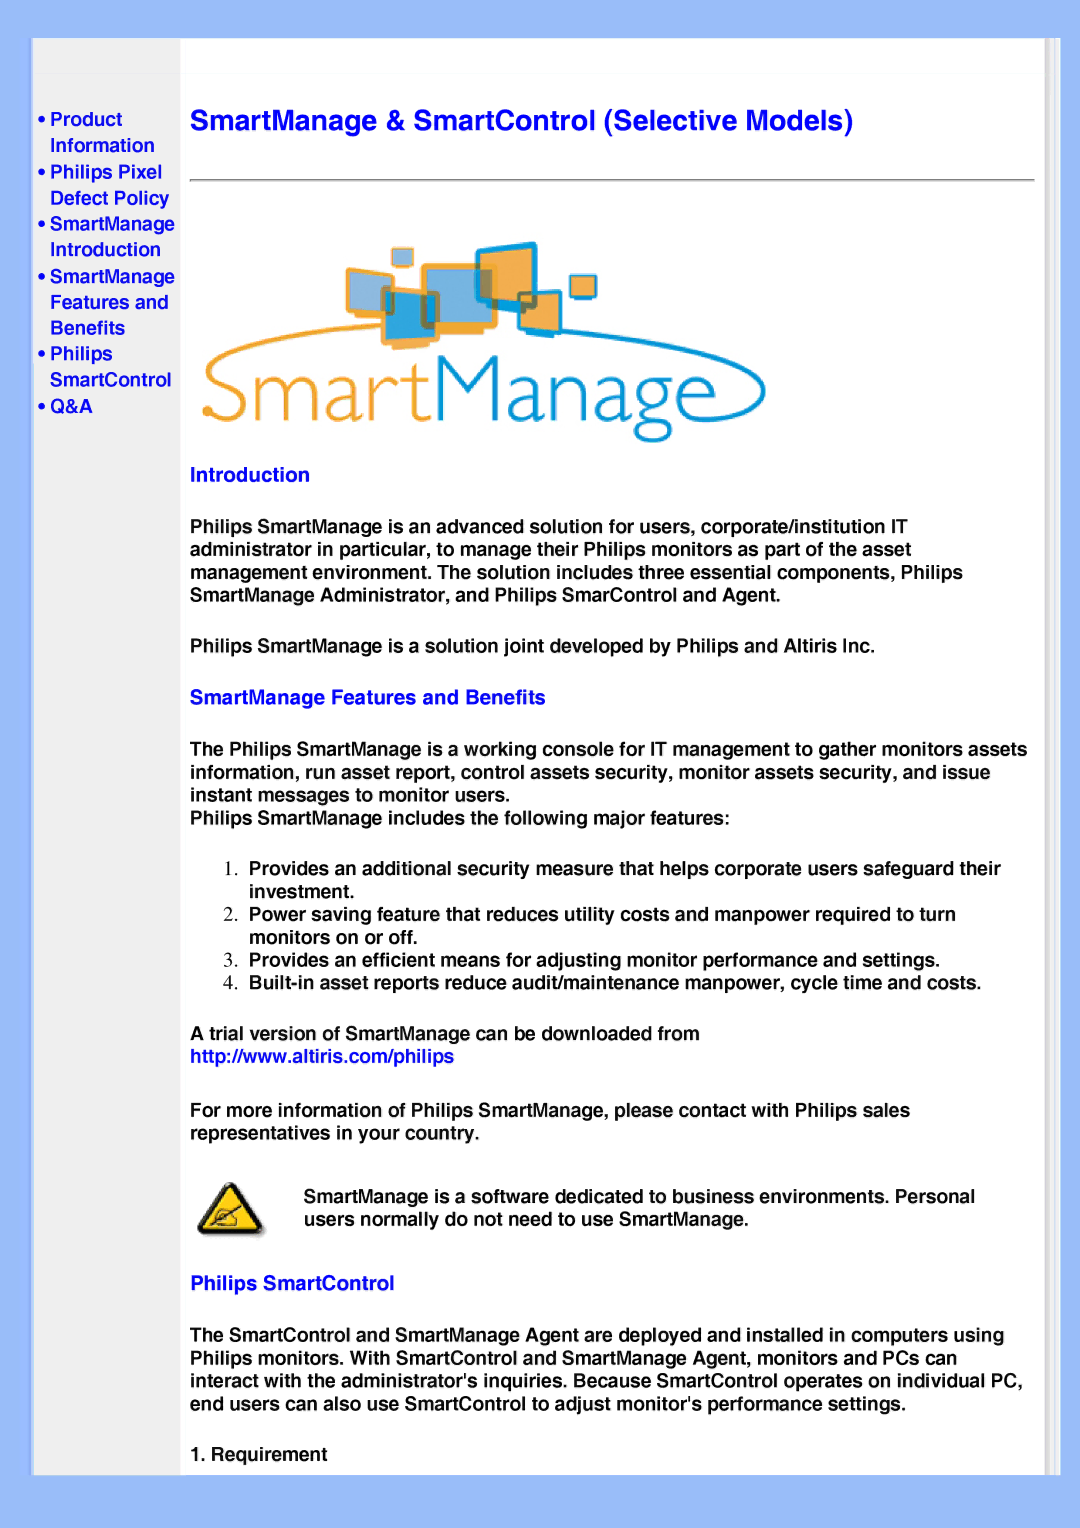 Philips HWS8220Q user manual Introduction, SmartManage Features and Benefits, Philips SmartControl 